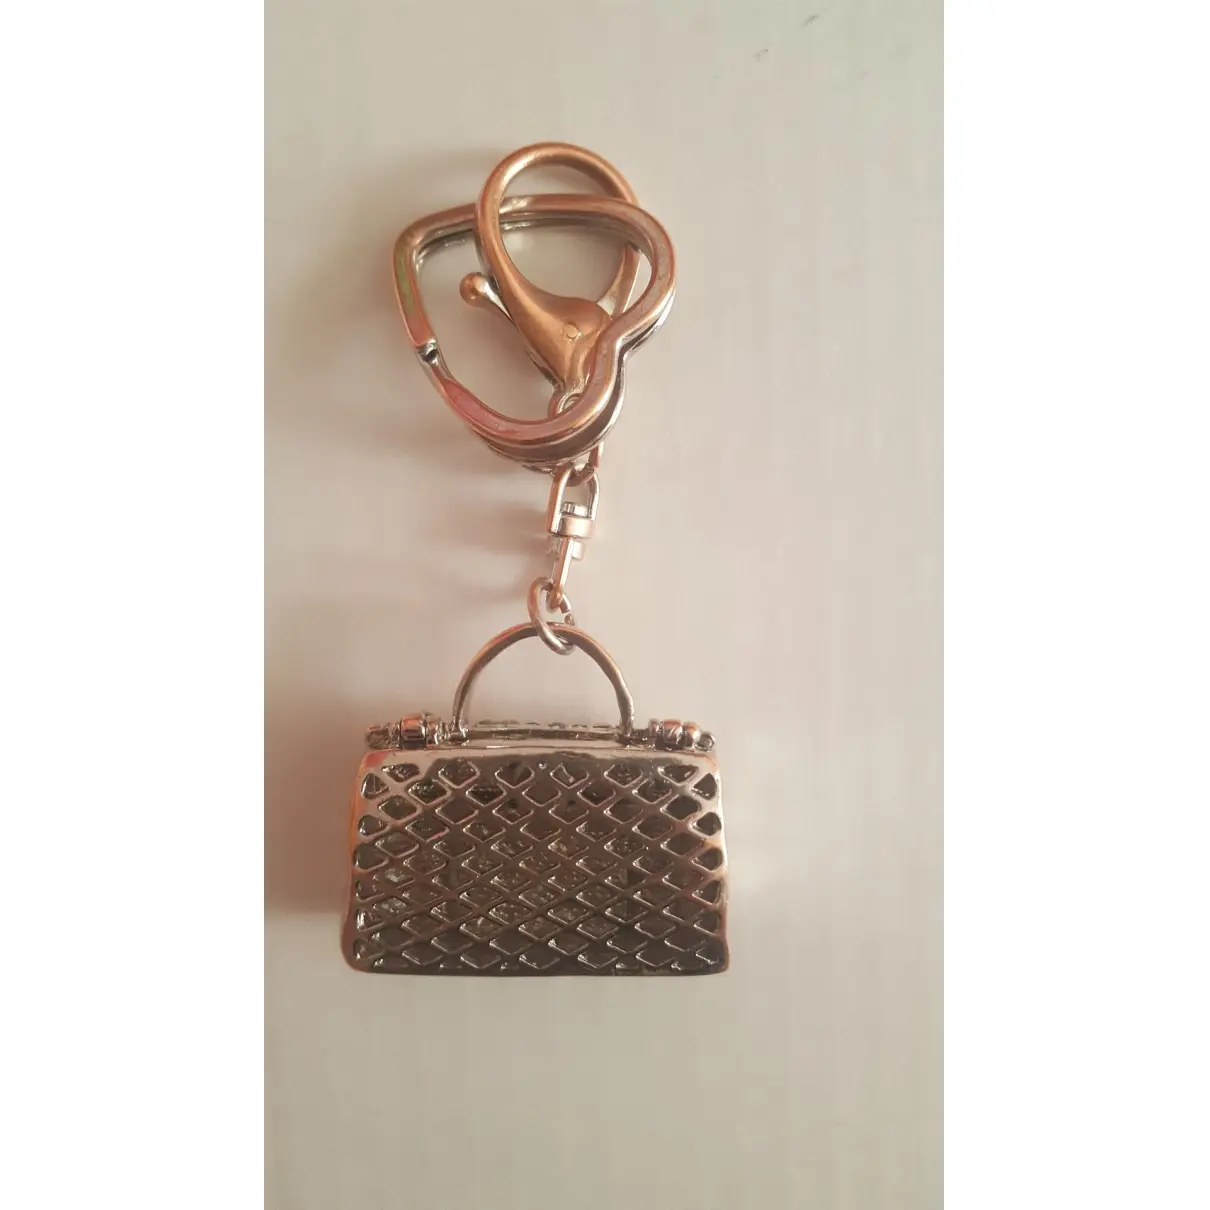 Moschino Love Key ring for sale